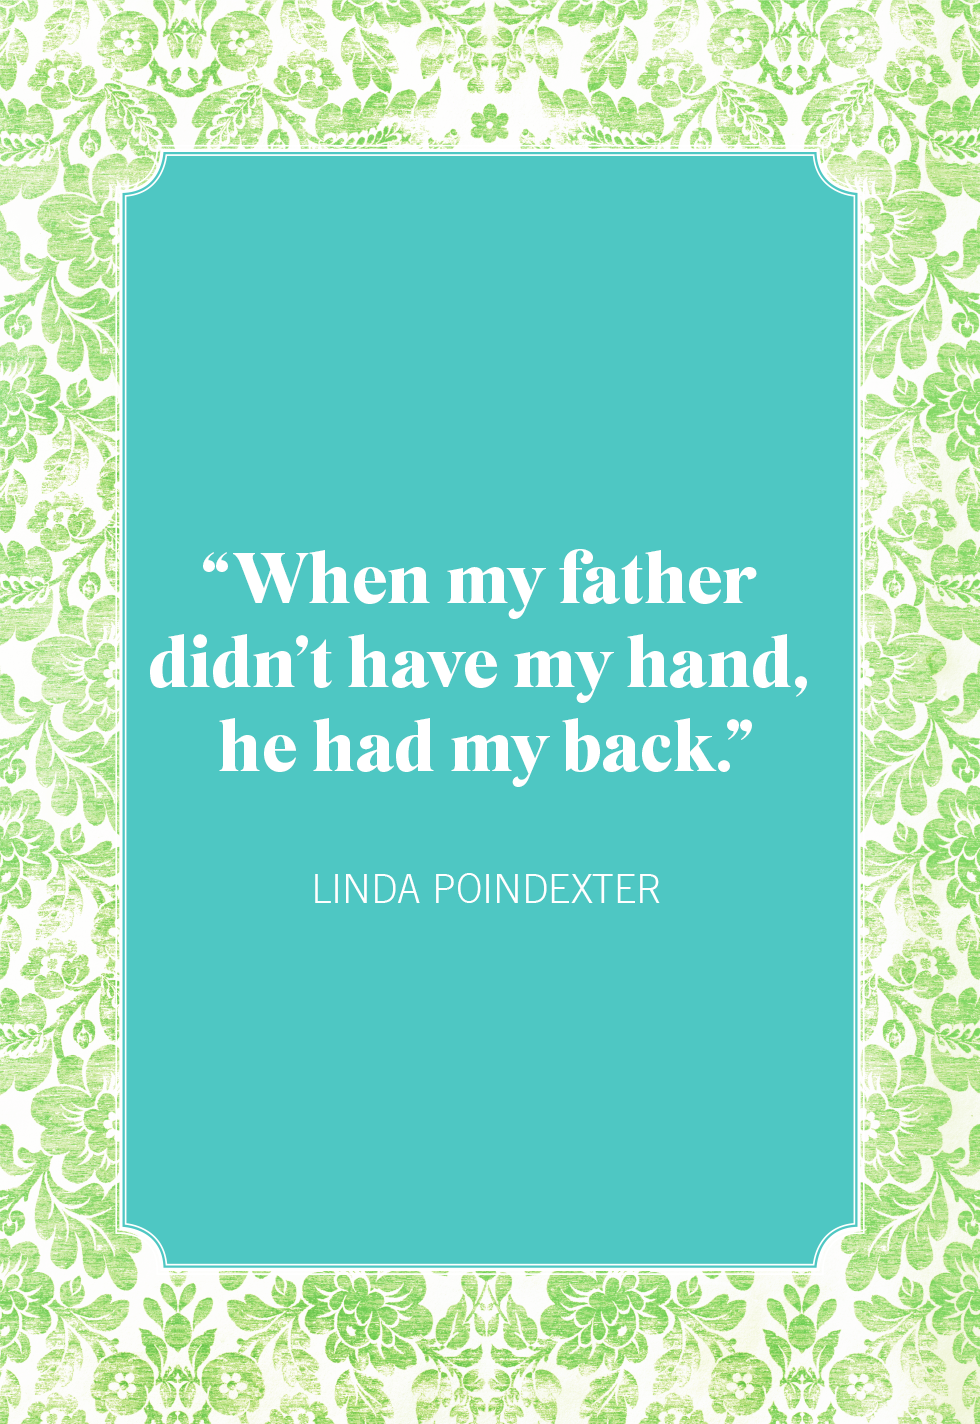 Heartwarming Quotes Celebrating the Bond Between Fathers and Daughters